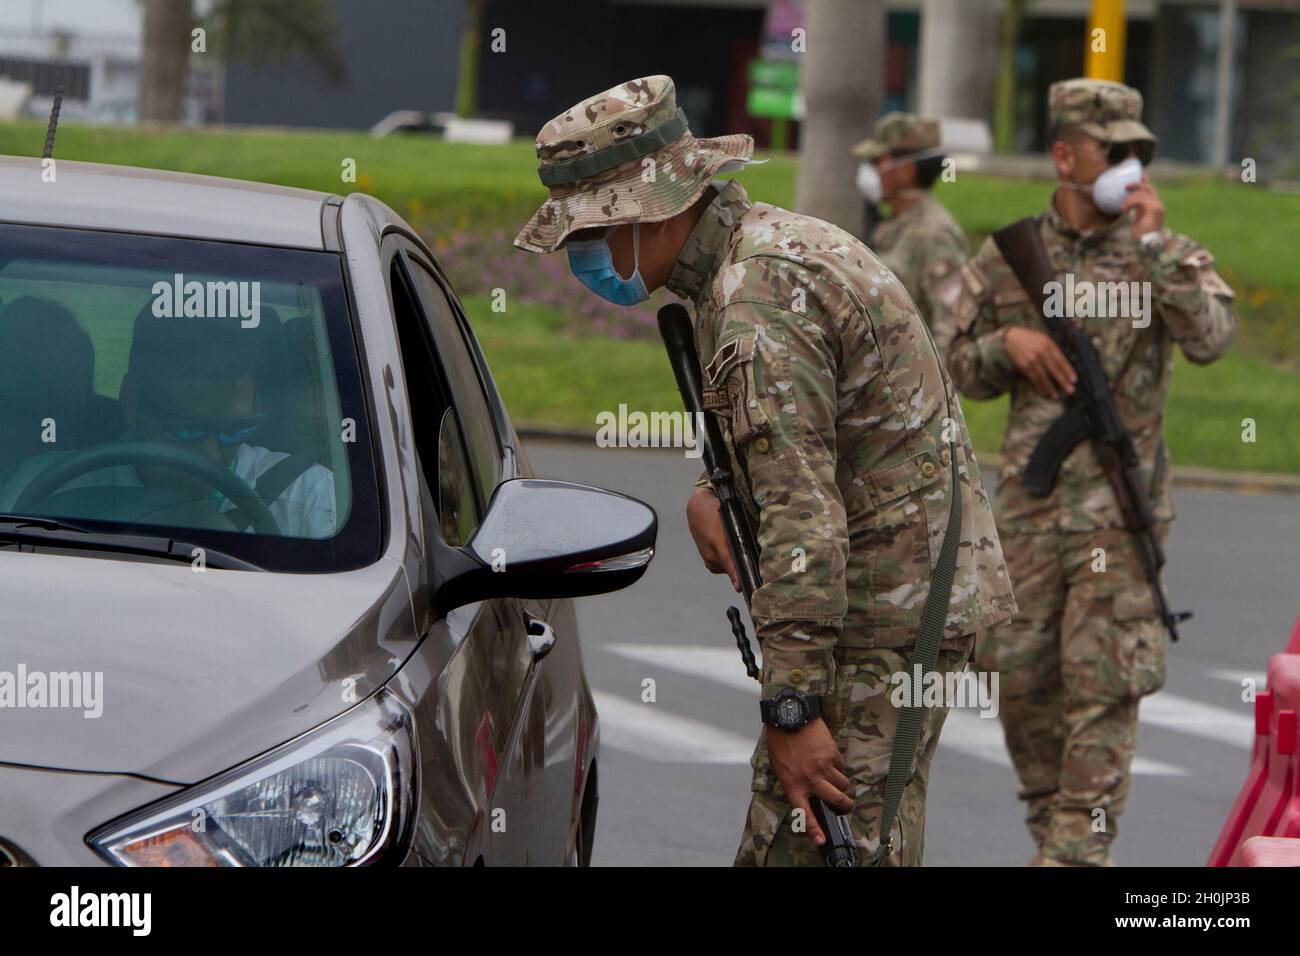 A military patrol stop a vehicle during the national state of emergency as a response to the COVID-19 pandemic in Lima, Peru. According to the Peruvian Government 33,931 people have been infected and 943 have died as of April 29, 2020. Stock Photo